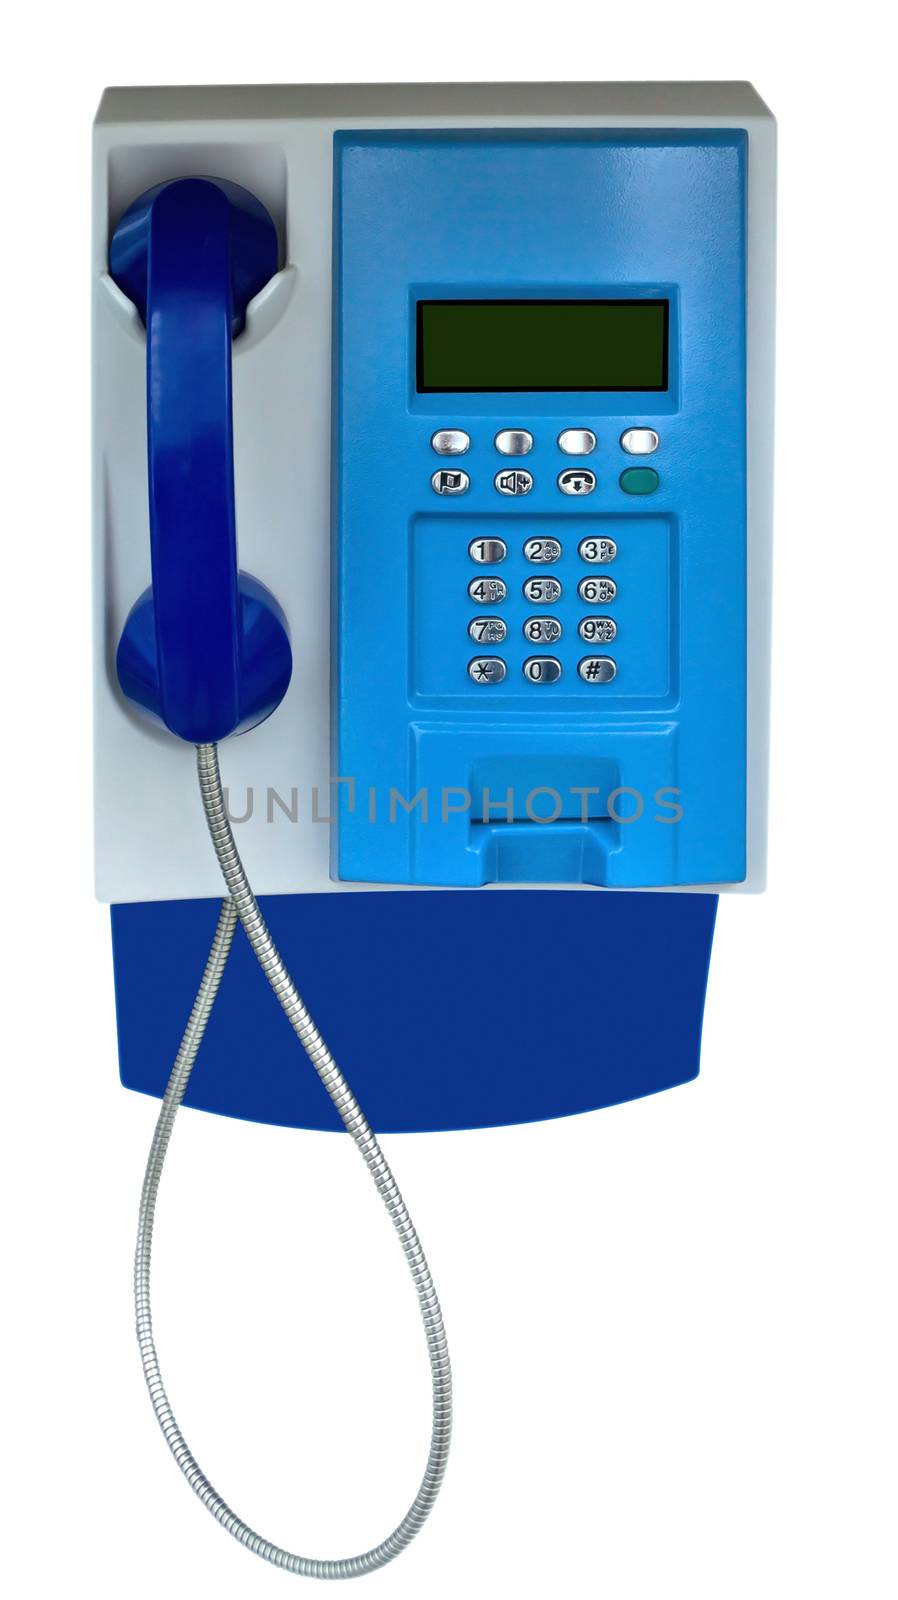 Public Payphone Isolated on White Background. Clipping Path included.